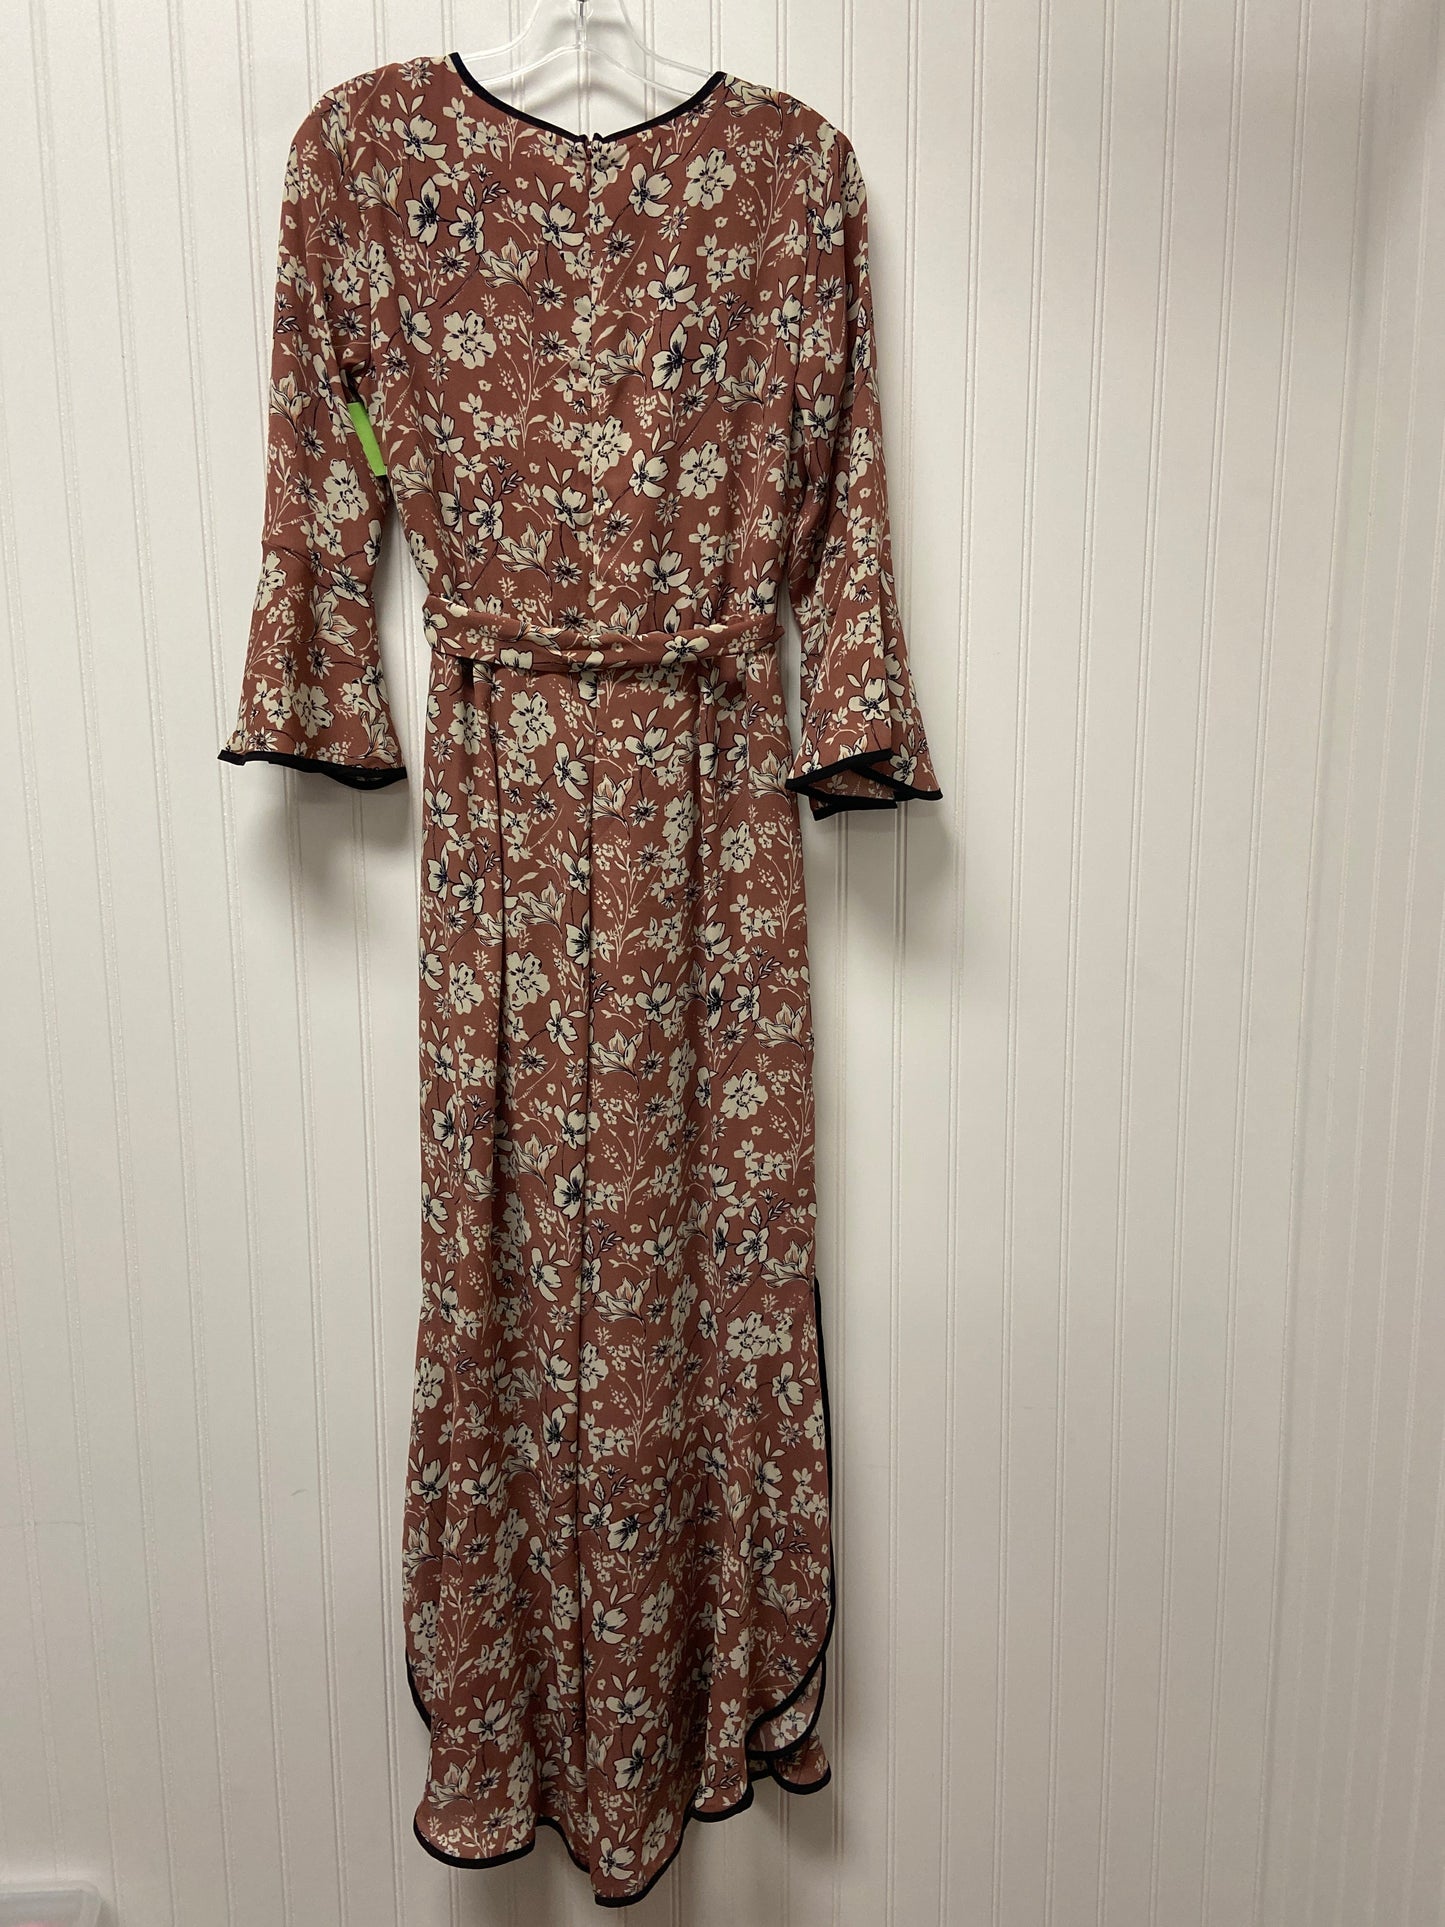 Dress Casual Maxi By Clothes Mentor  Size: M